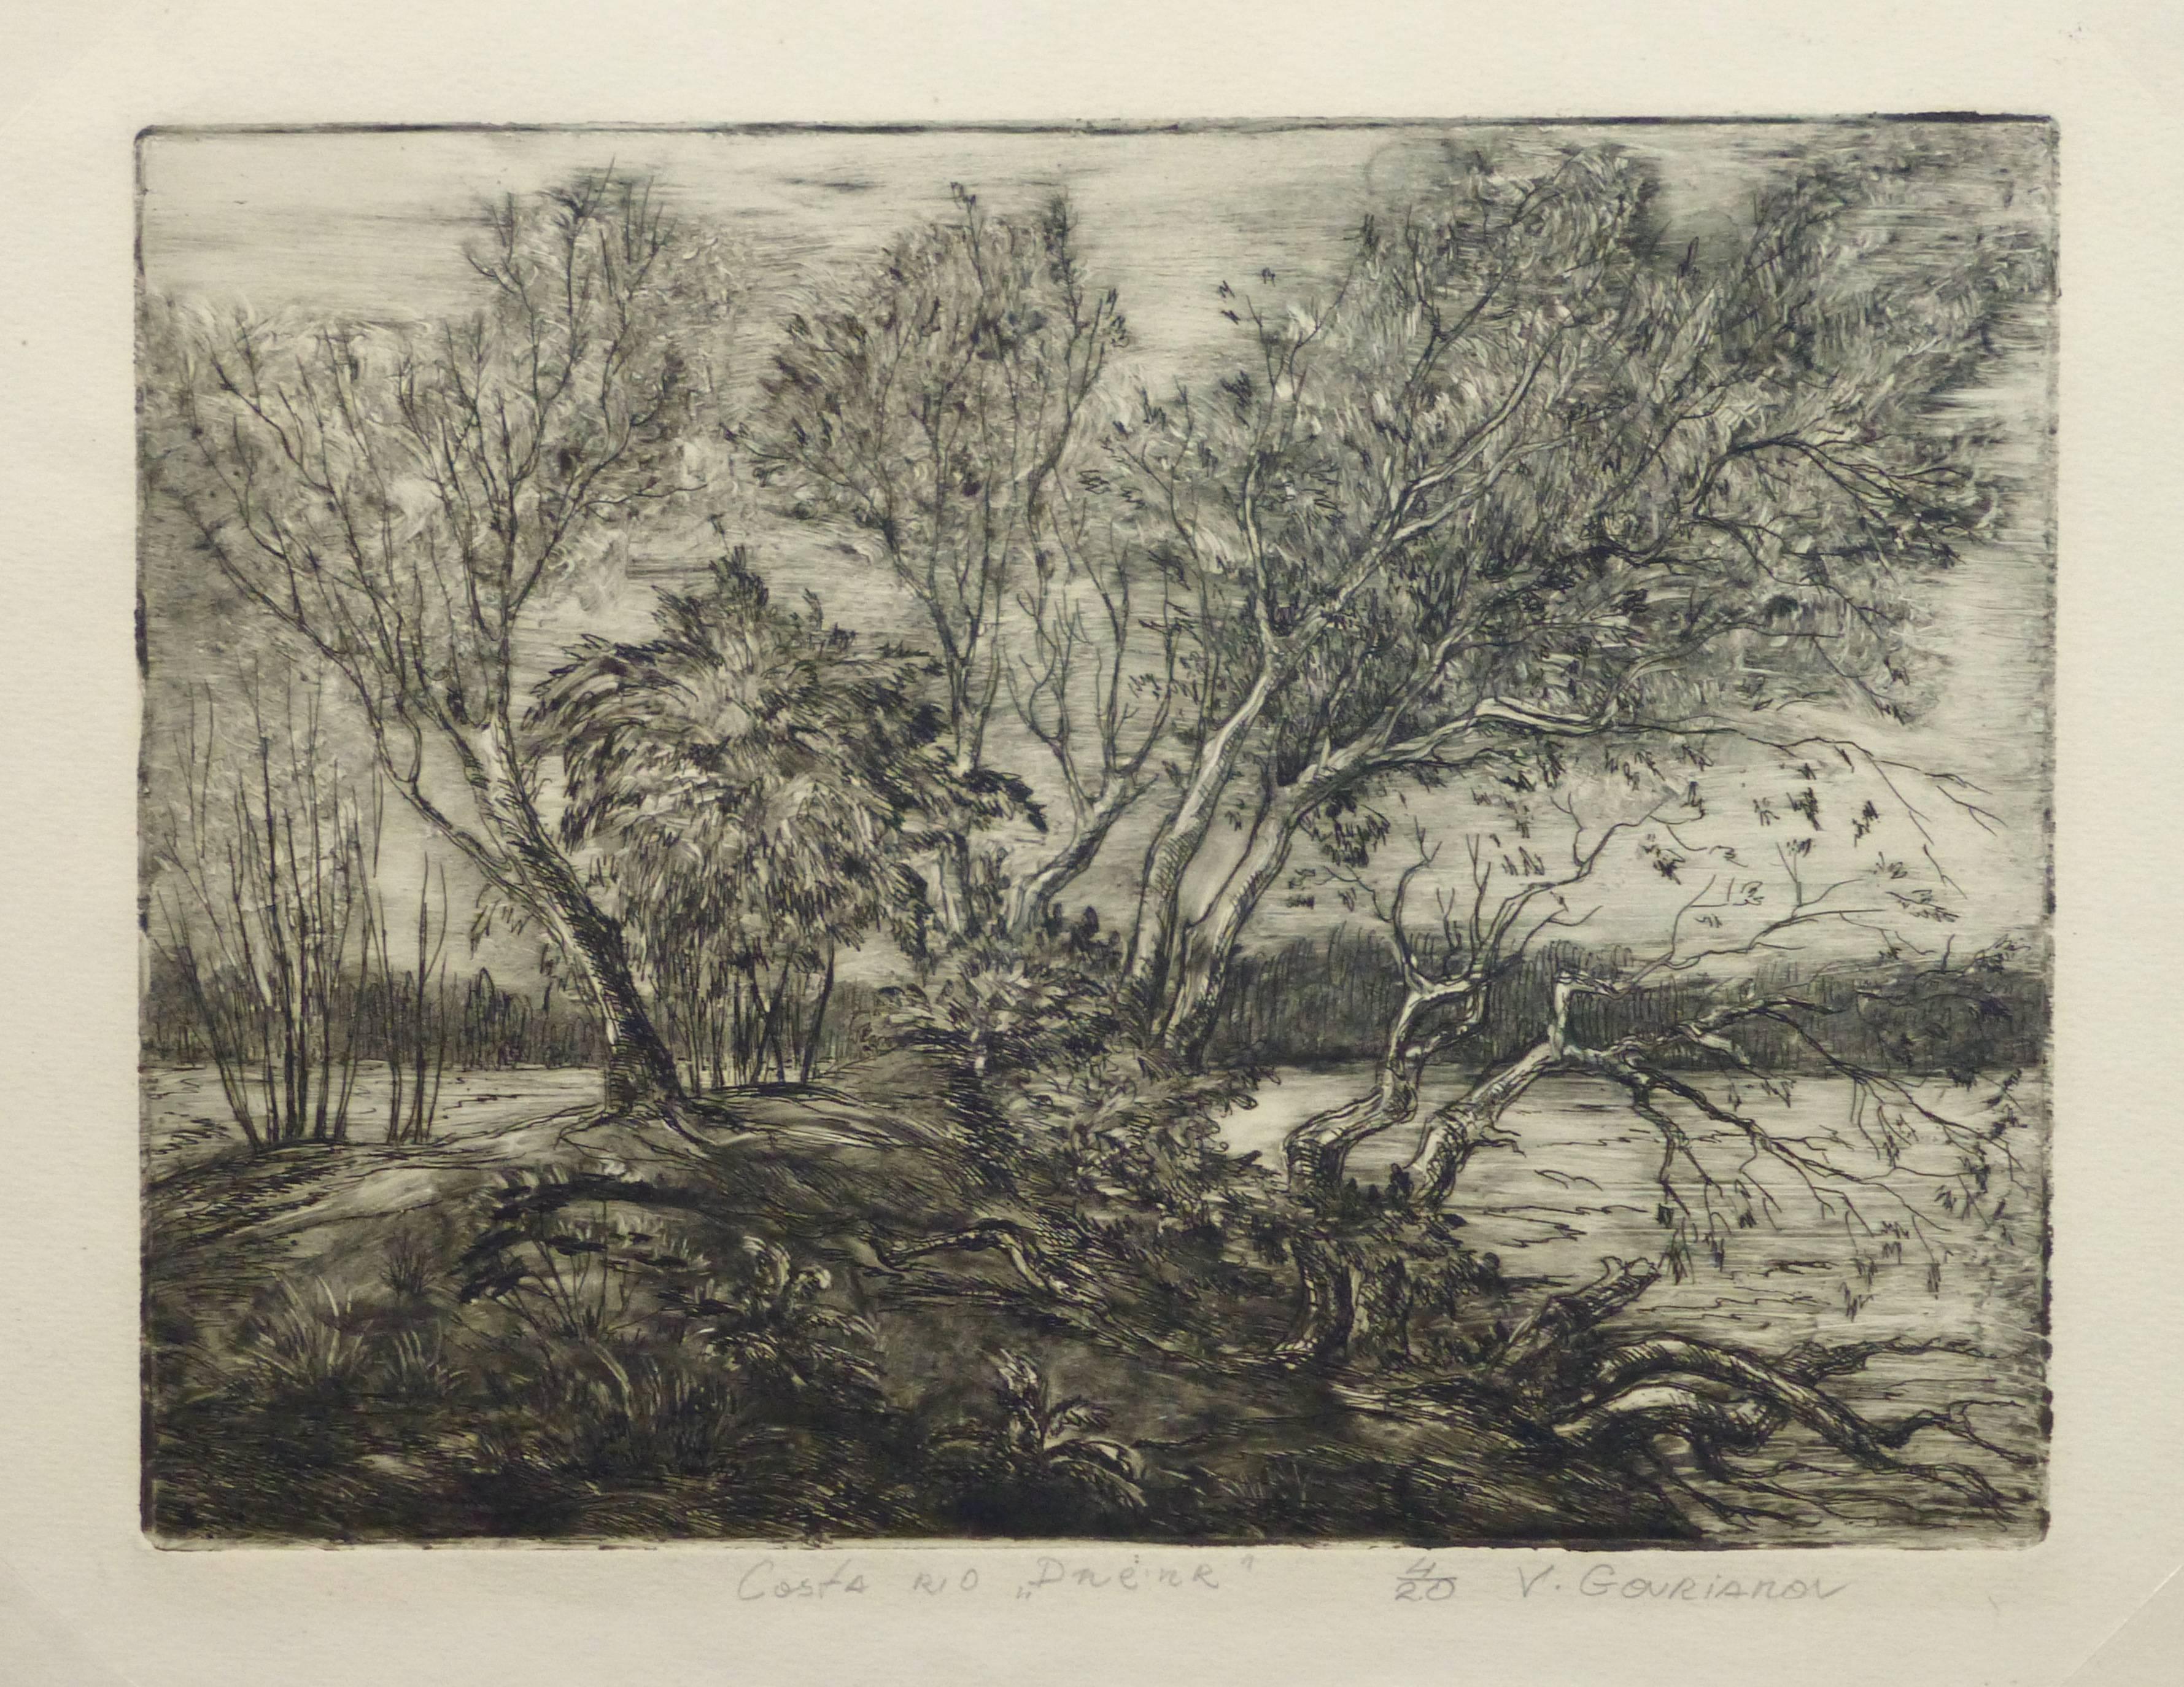 V. Gourianov Landscape Print - Vintage Etching - Curving Trees by the Riverside